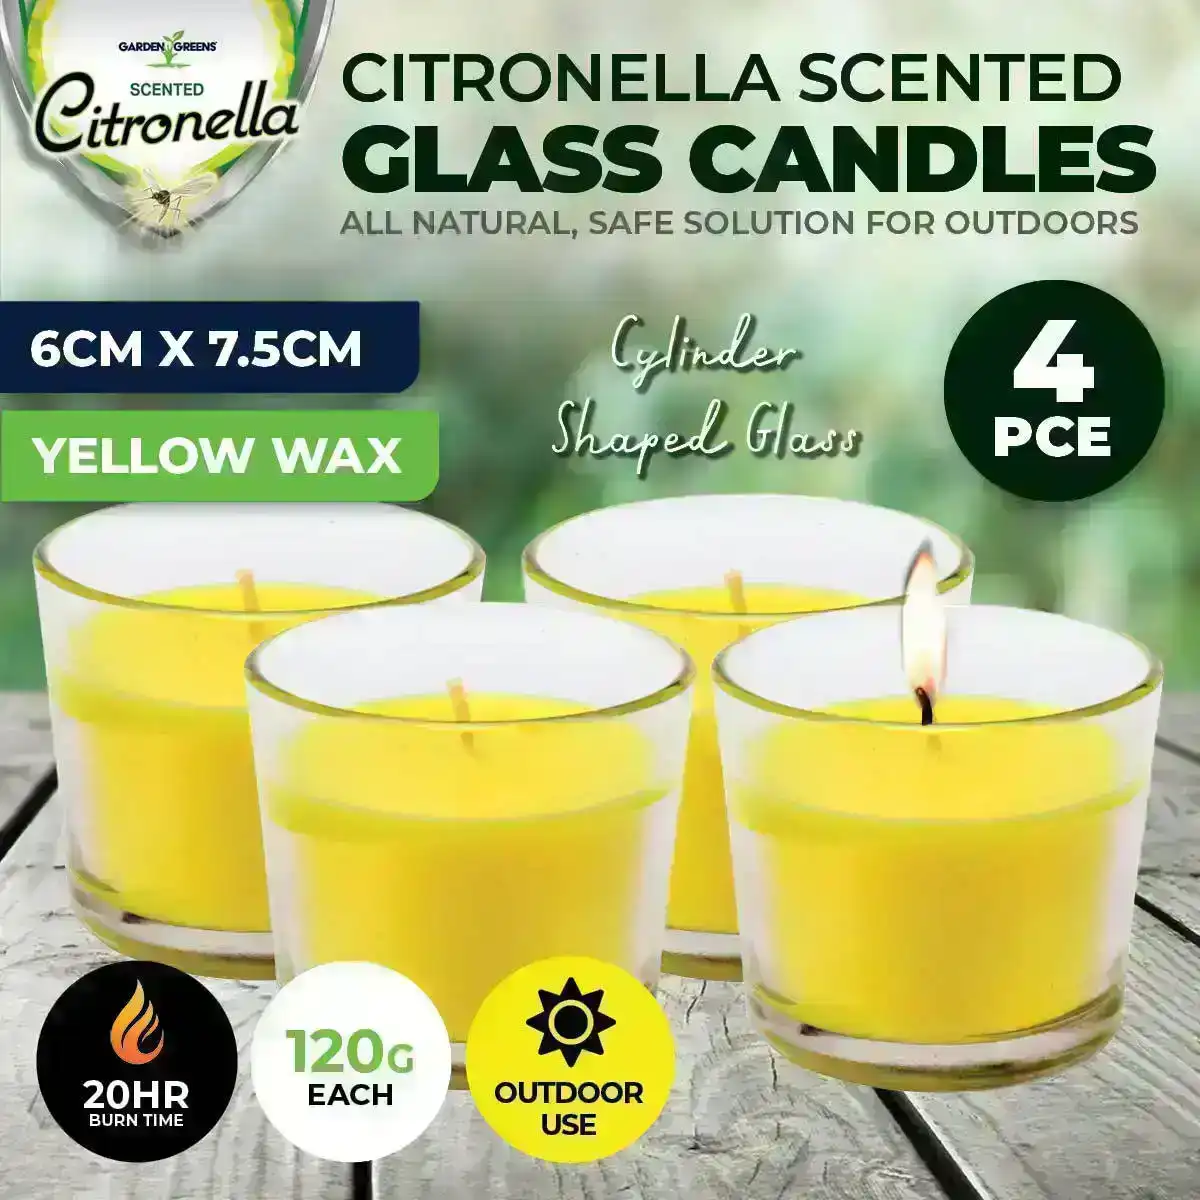 Garden Greens® 4PCE Citronella Scented Candles Cylinder Glass Jars 120g